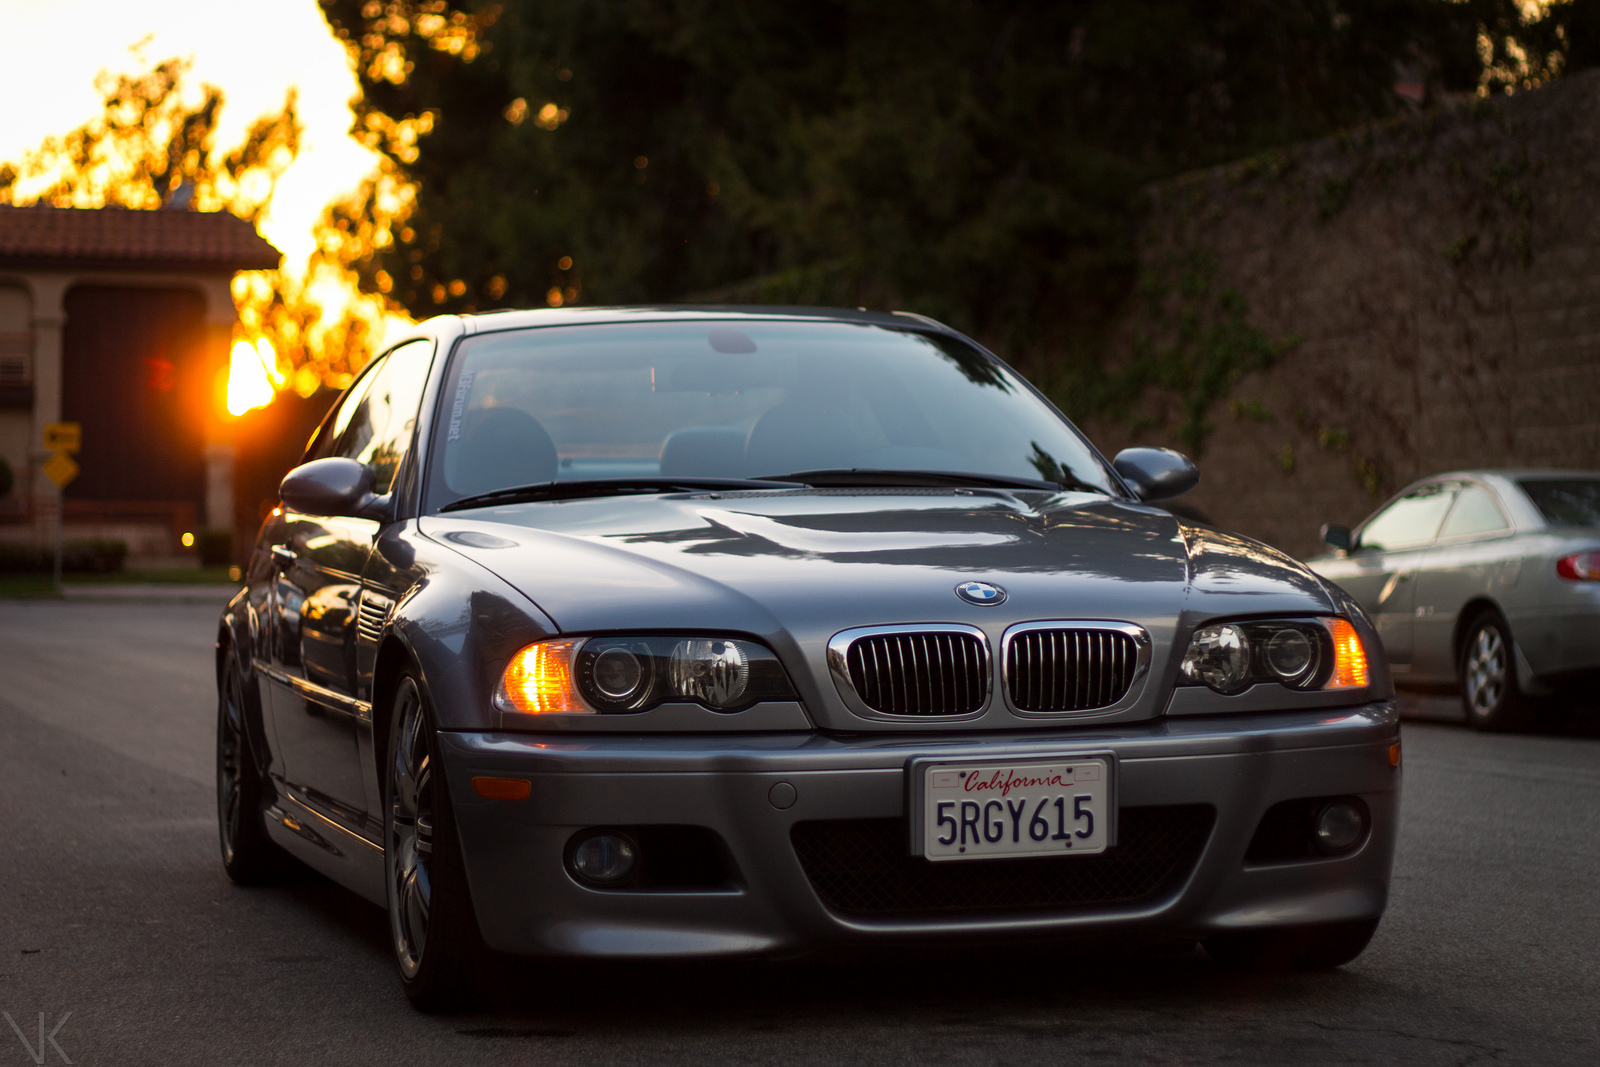 BMW M3 E46 Silver Gray Holy Drift   HD Car Wallpapers and Videos